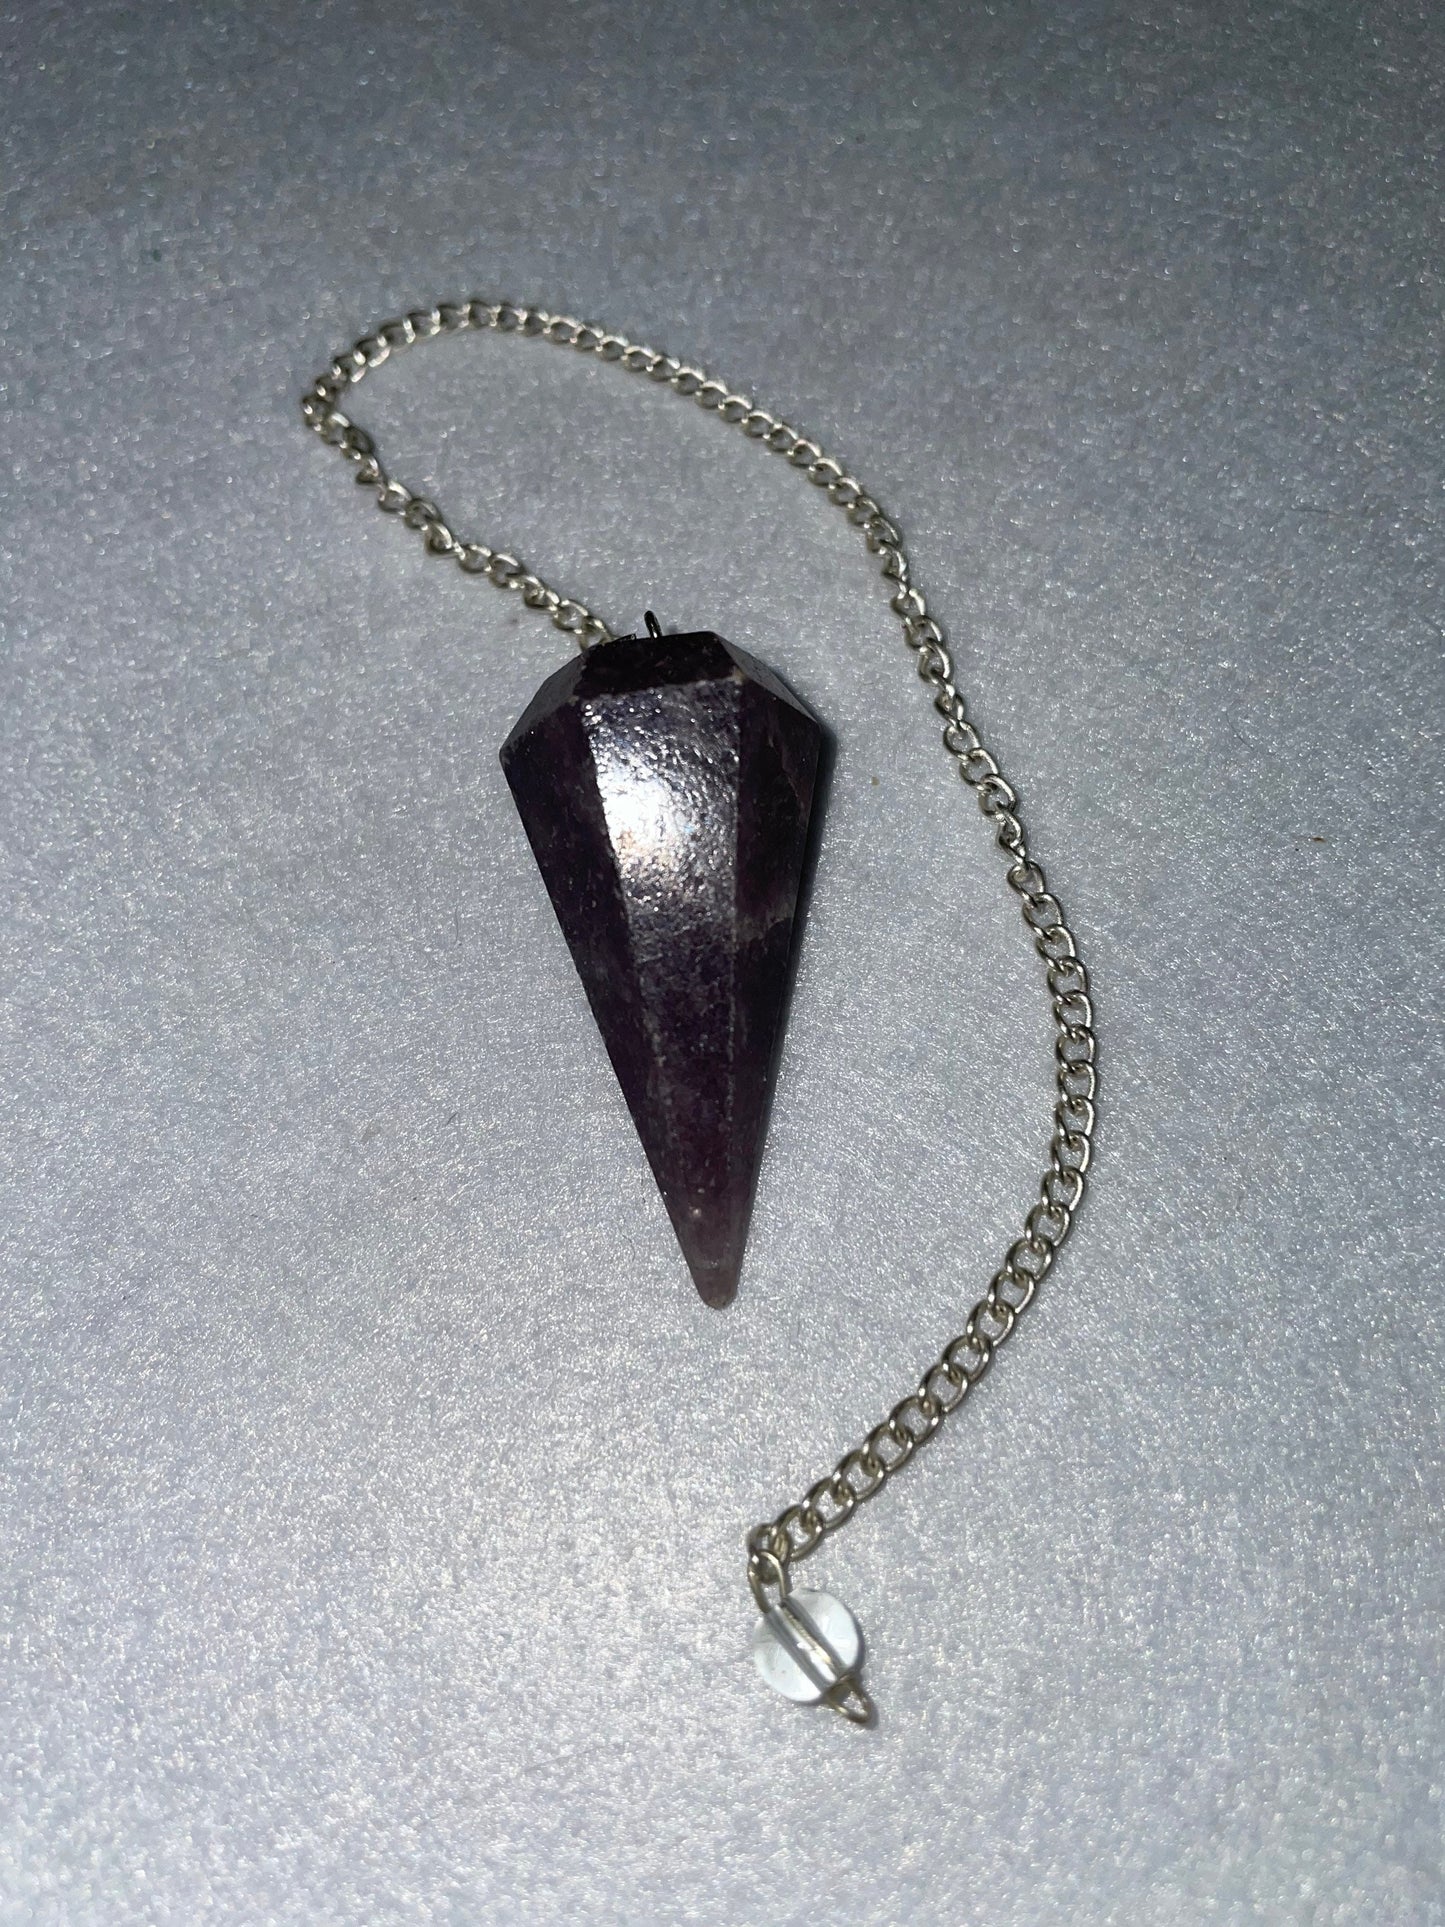 Lovely healing Amethyst Pendulum is  1.65” and with chain is 9.5”.